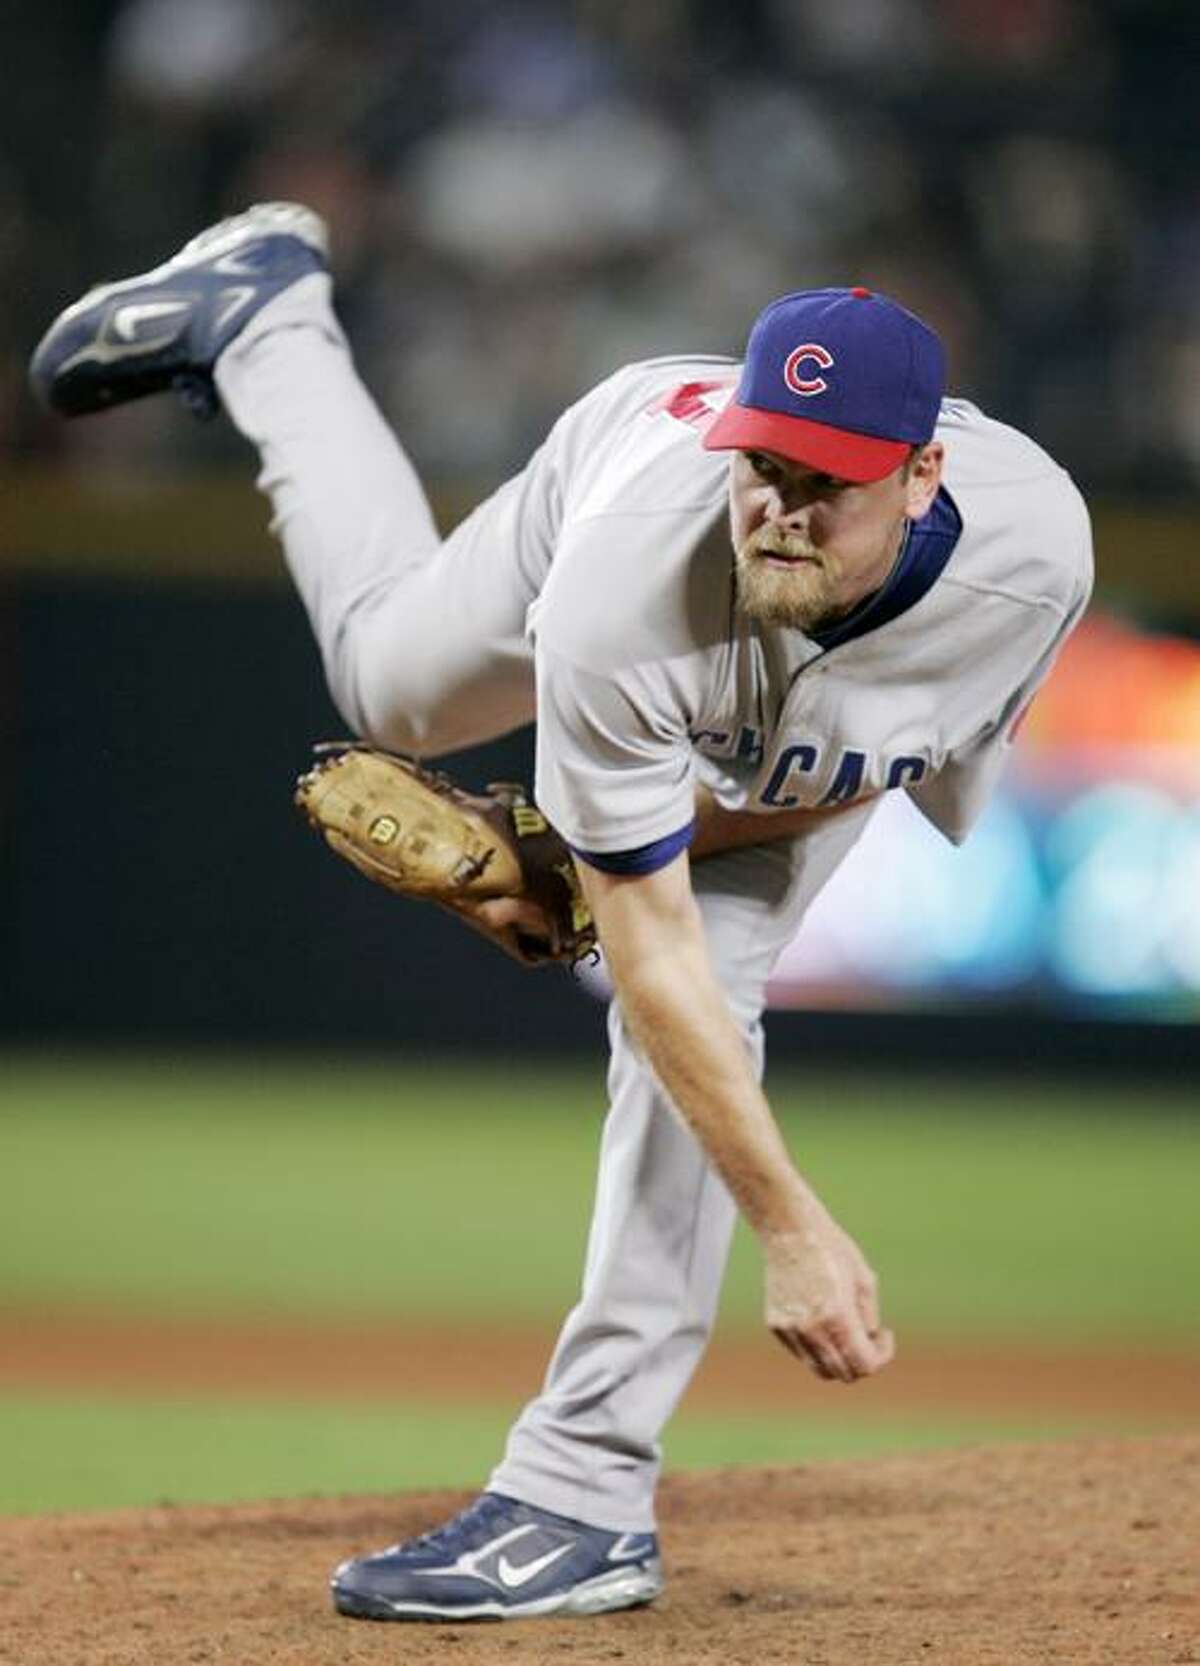 FILE - In this Aug. 13, 2008 file photo, Chicago Cubs pitcher Kerry Wood throws against the Atlanta Braves in the eighth inning of a baseball game in Atlanta. Wood is returning to the Chicago Cubs, agreeing to a one-year, $1.5 million contract, a person familiar with the negotiations told The Associated Press. The person spoke Thursday, Dec. 16, 2010, on condition of anonymity because the agreement had not yet been announced. (AP Photo/John Bazemore, File)